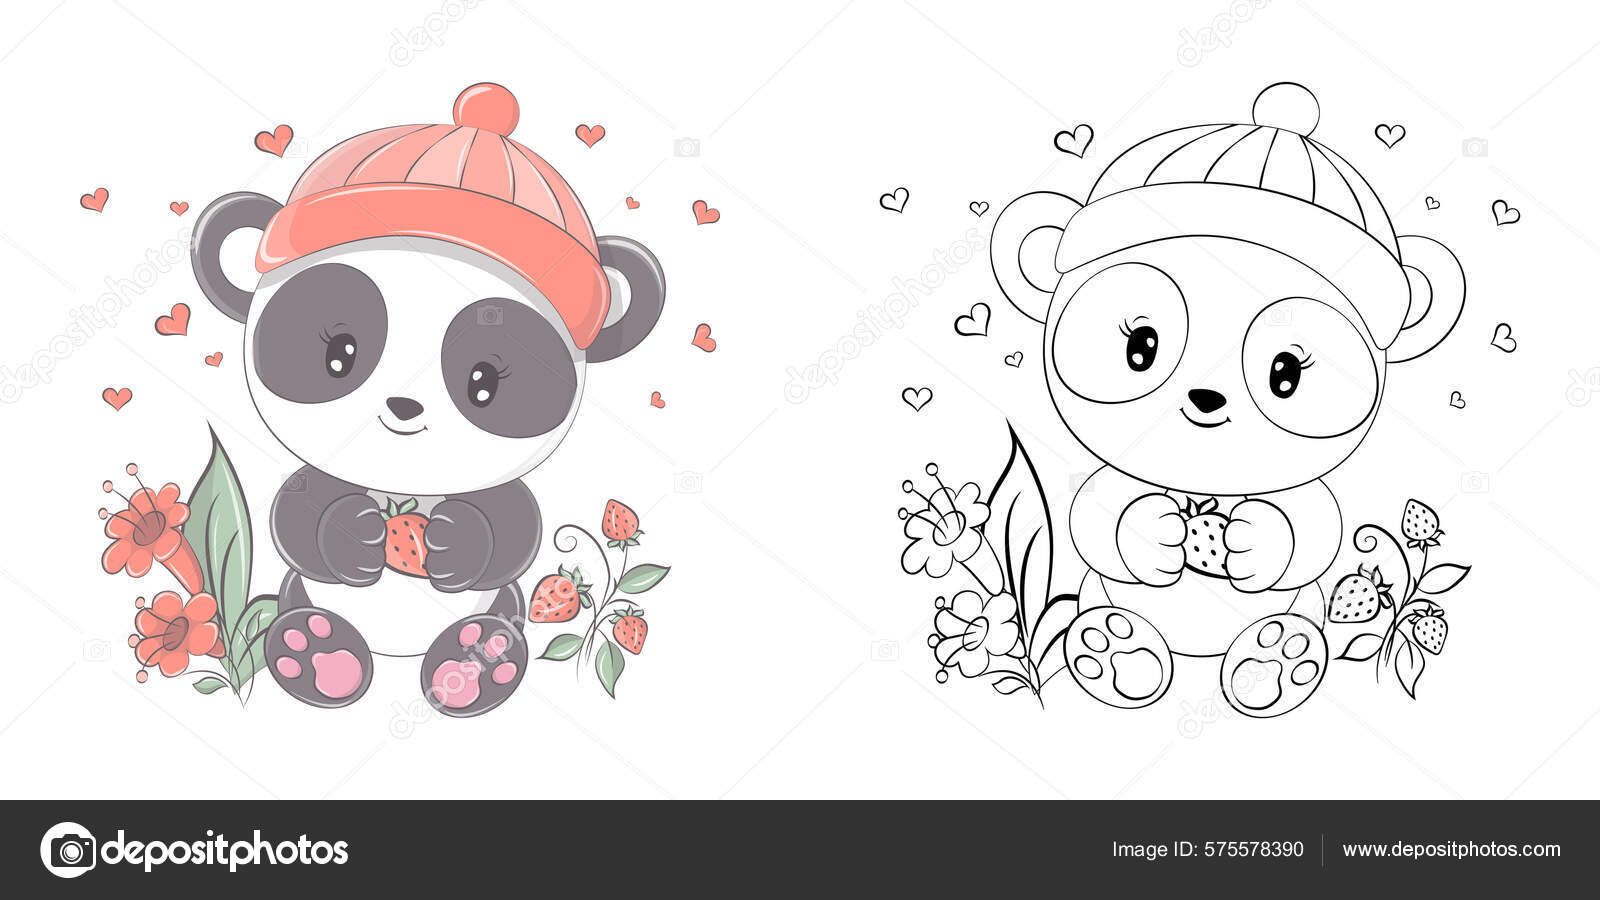 Cute Airplane Clipart, Clipart Panda - Free Clipart Images